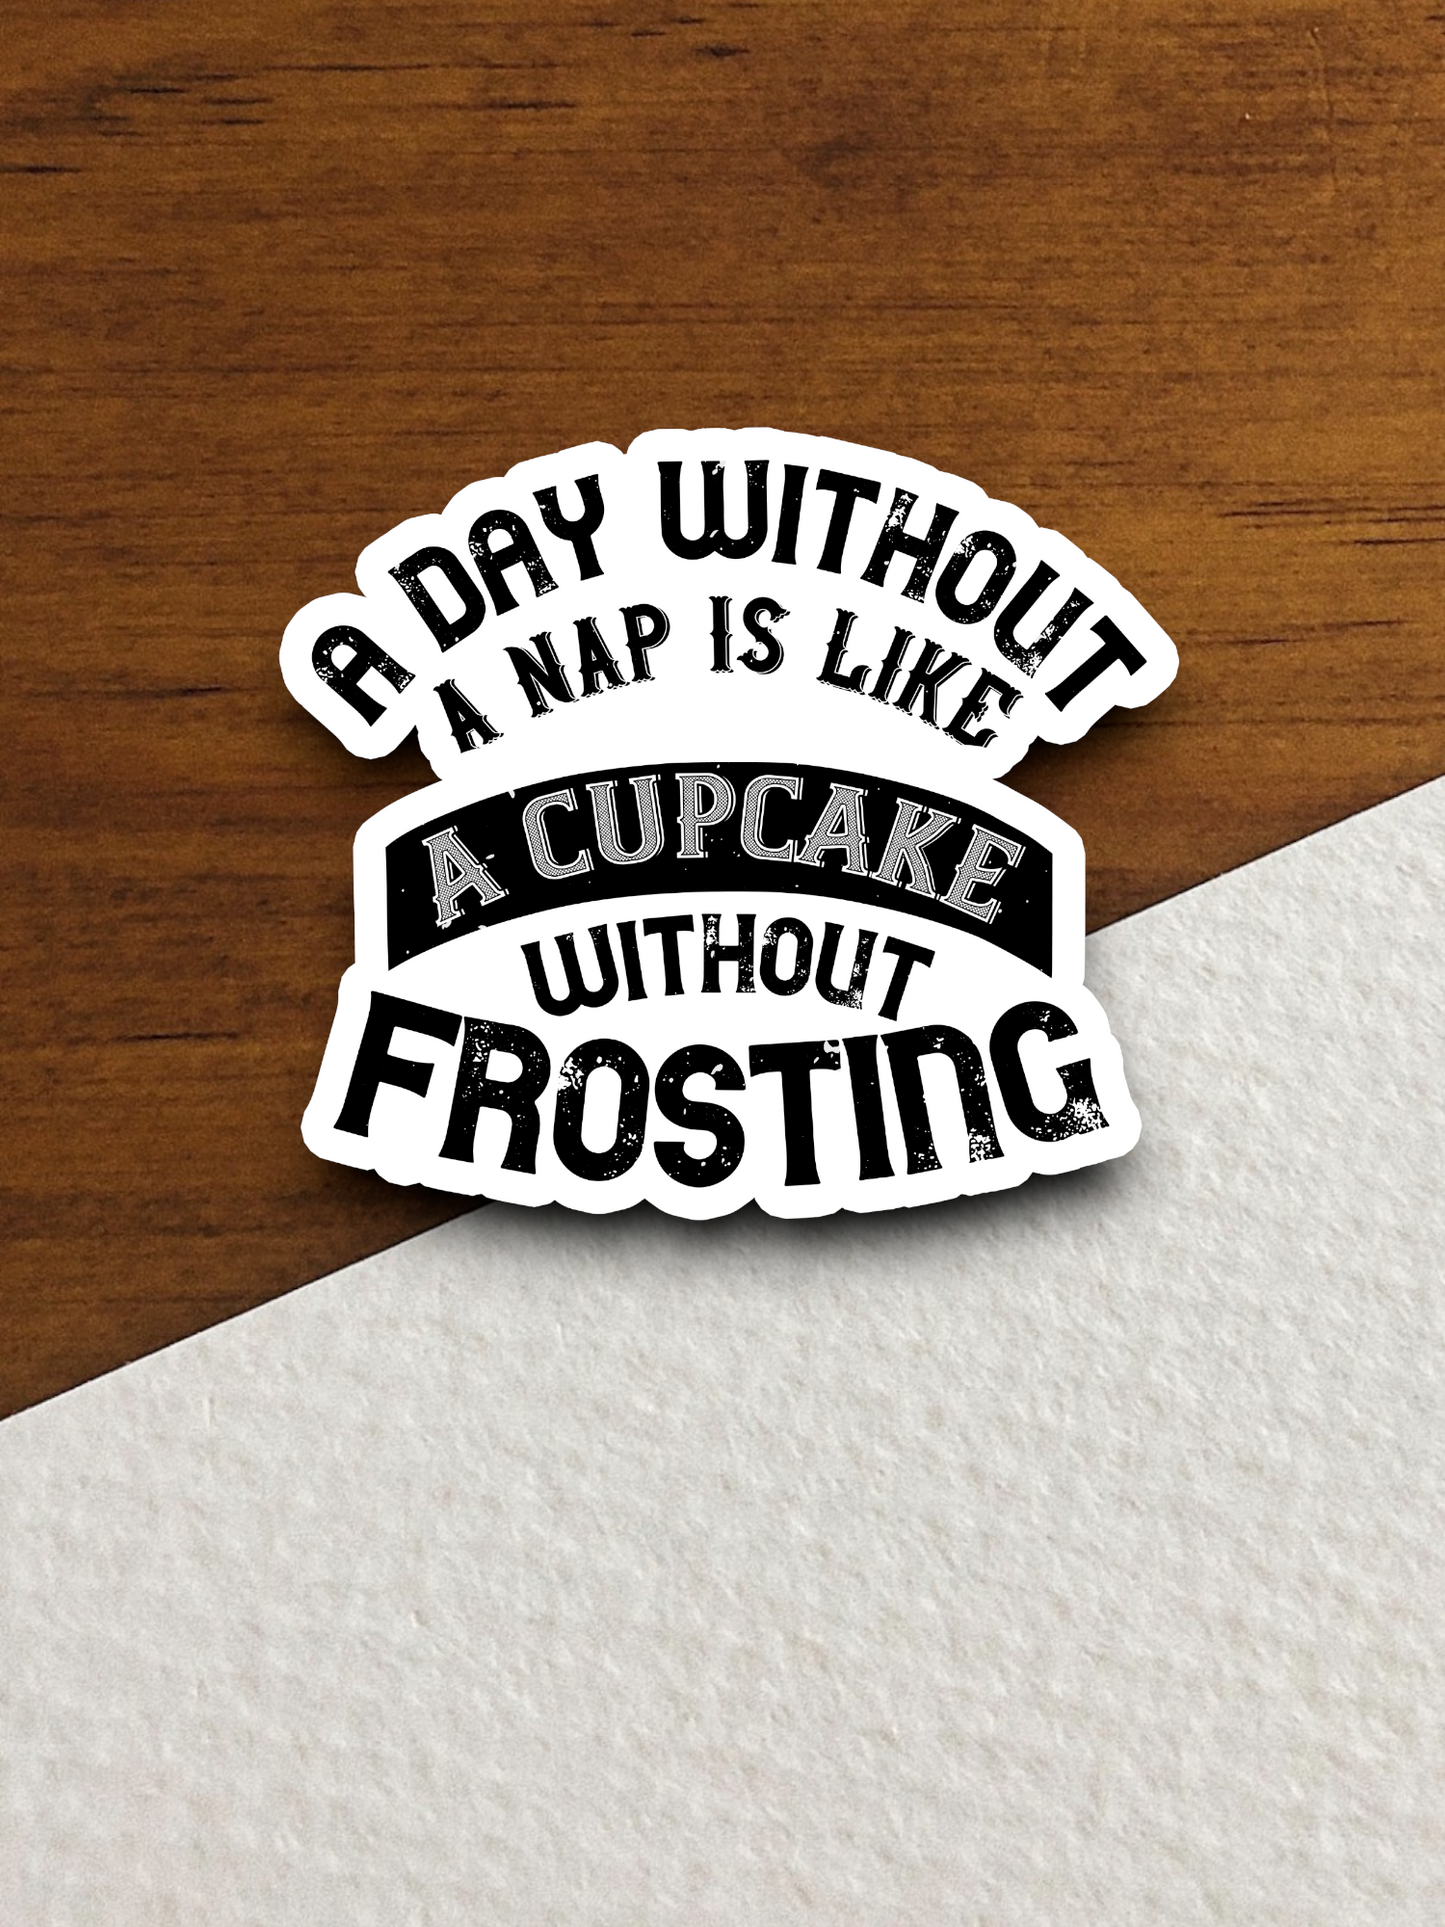 A Day Without A Nap Is Like a Cupcake Without Frosting Sticker